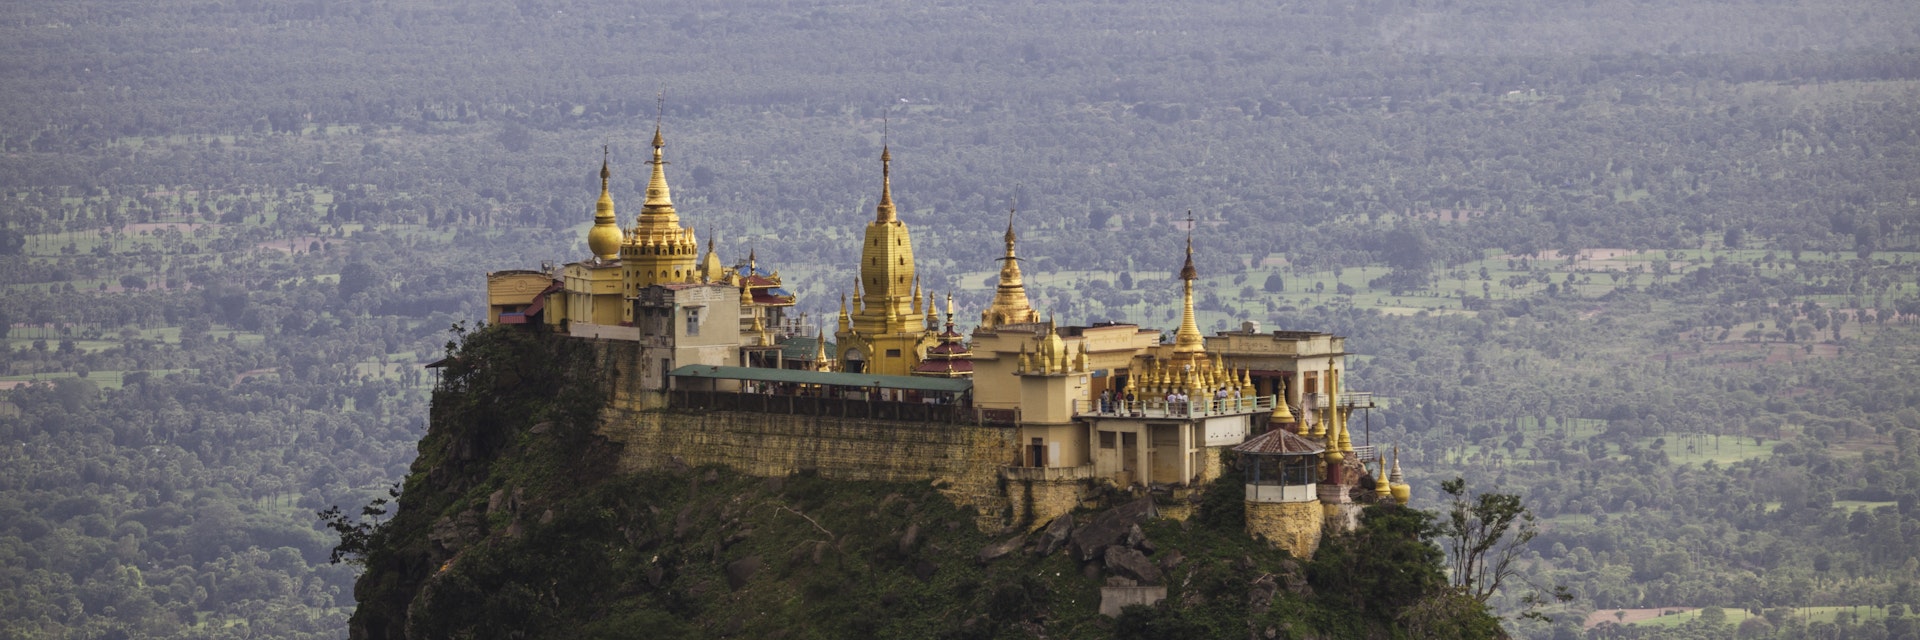 Mount Popa and Taung Kalat of the Mandalay Region, Myanmar. On the foothills of the mountain you will find this beautiful temple perched high up on a hill.